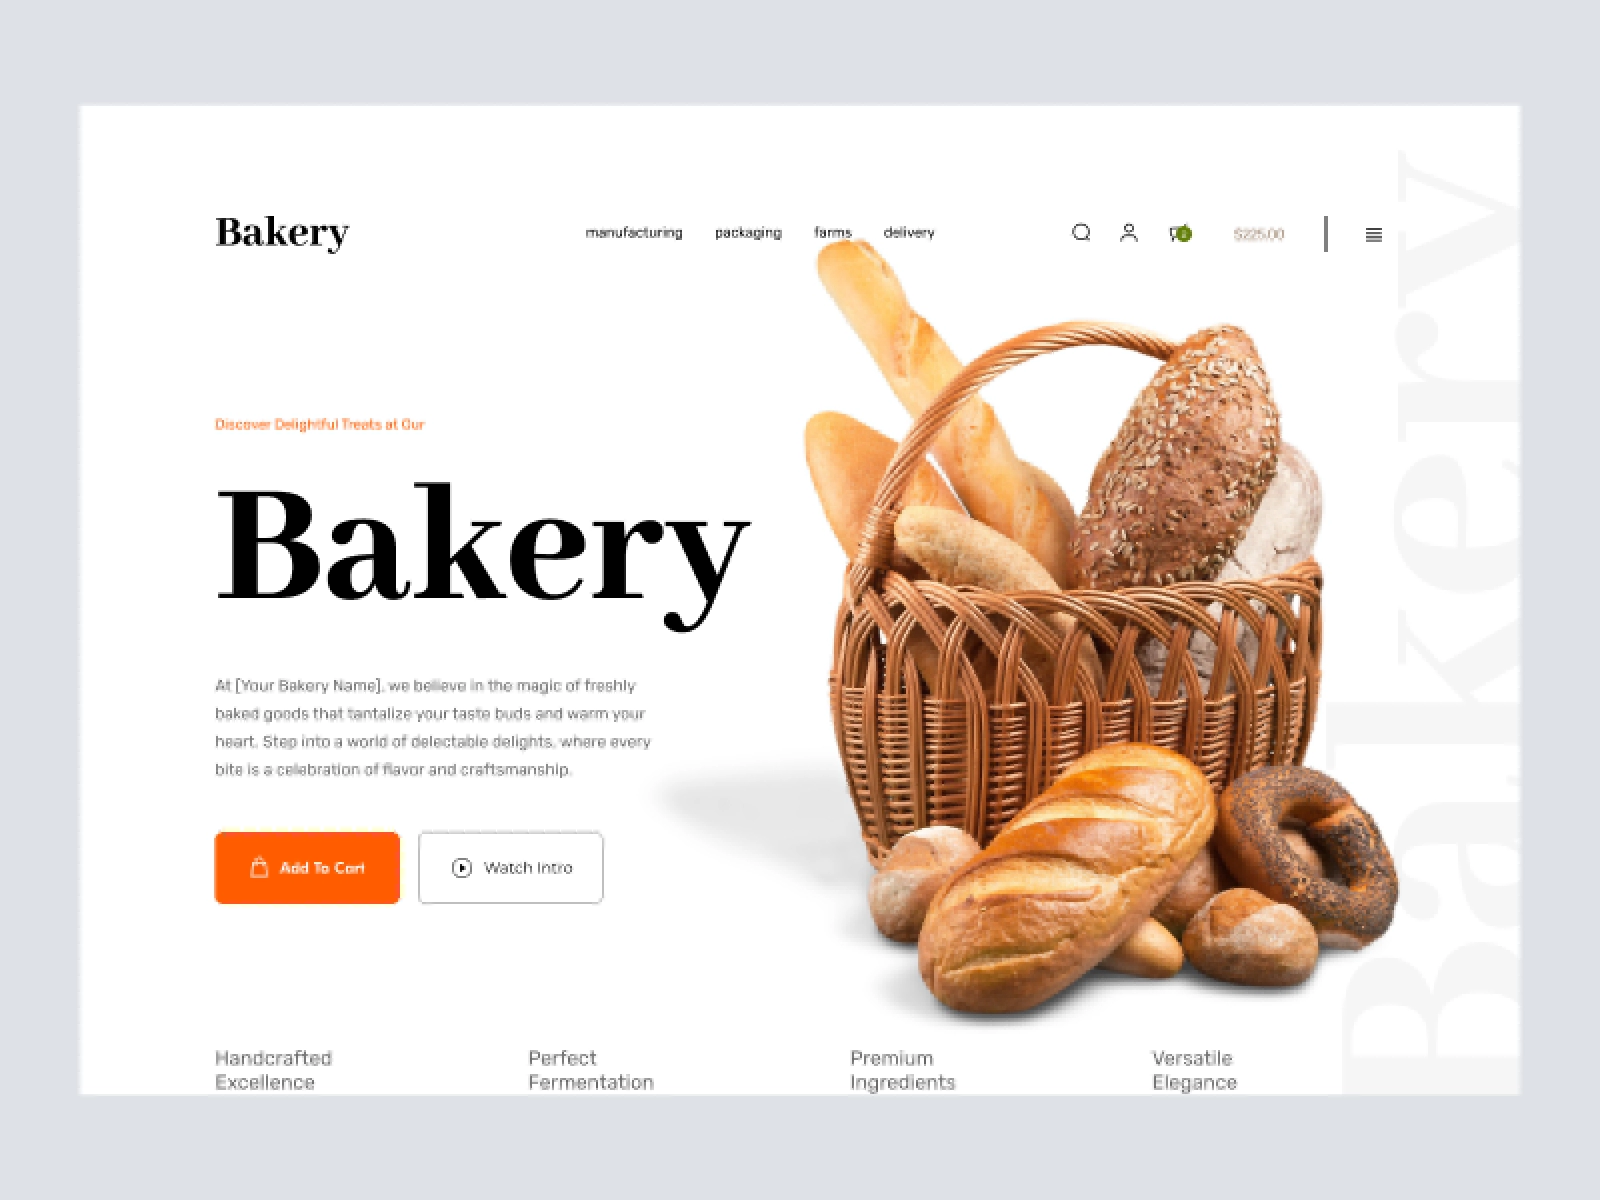 Bakery Shopify Store Design for Figma and Adobe XD - screen 1